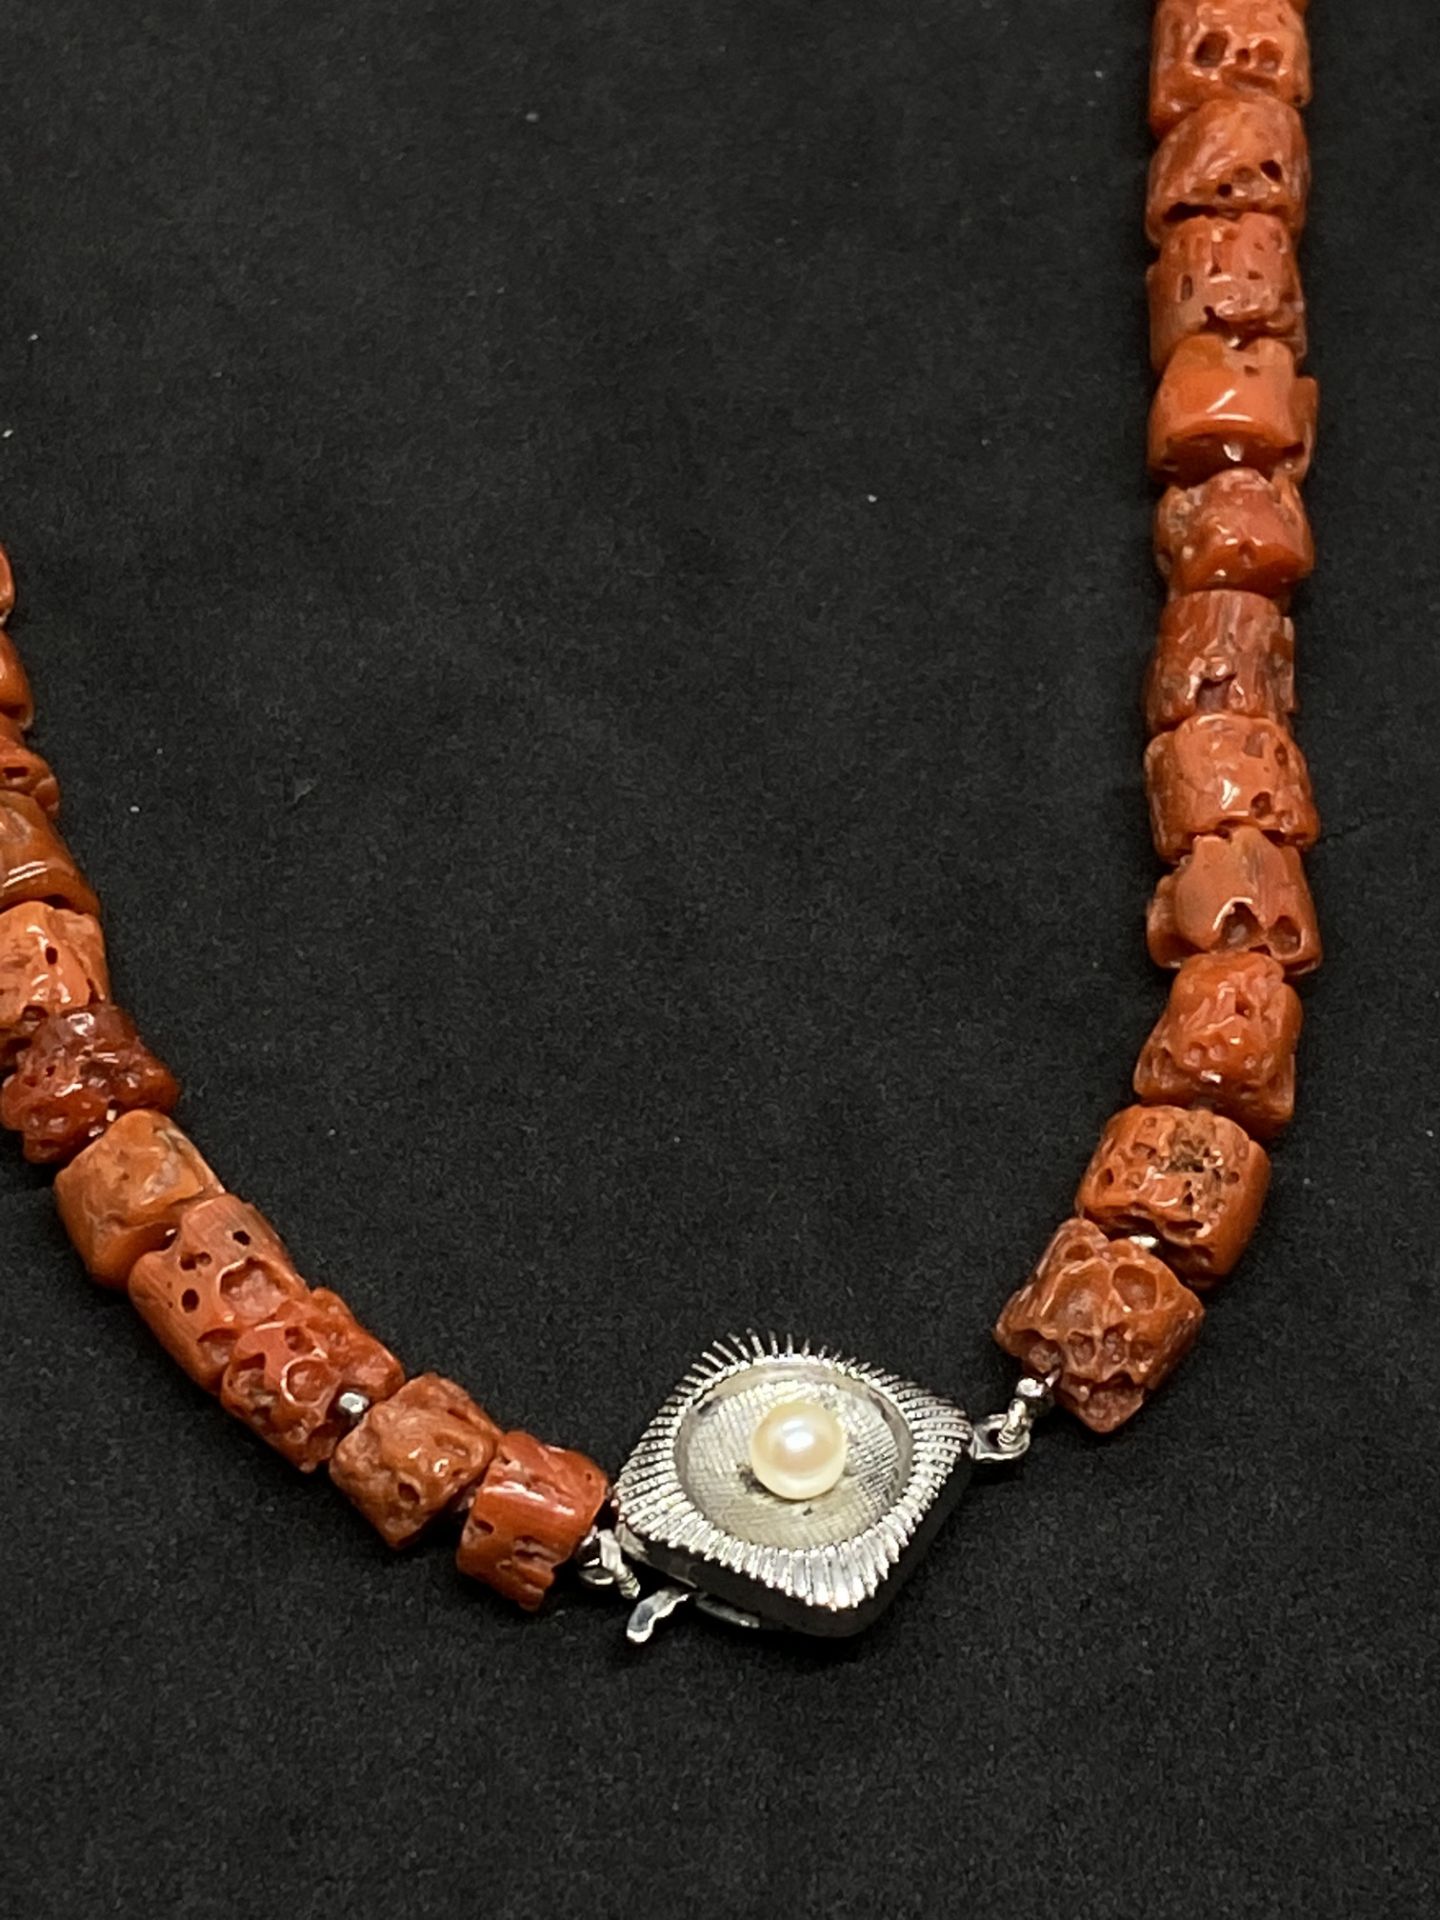 CORAL NECKLACE WITH SILVER CLASP - Image 2 of 2